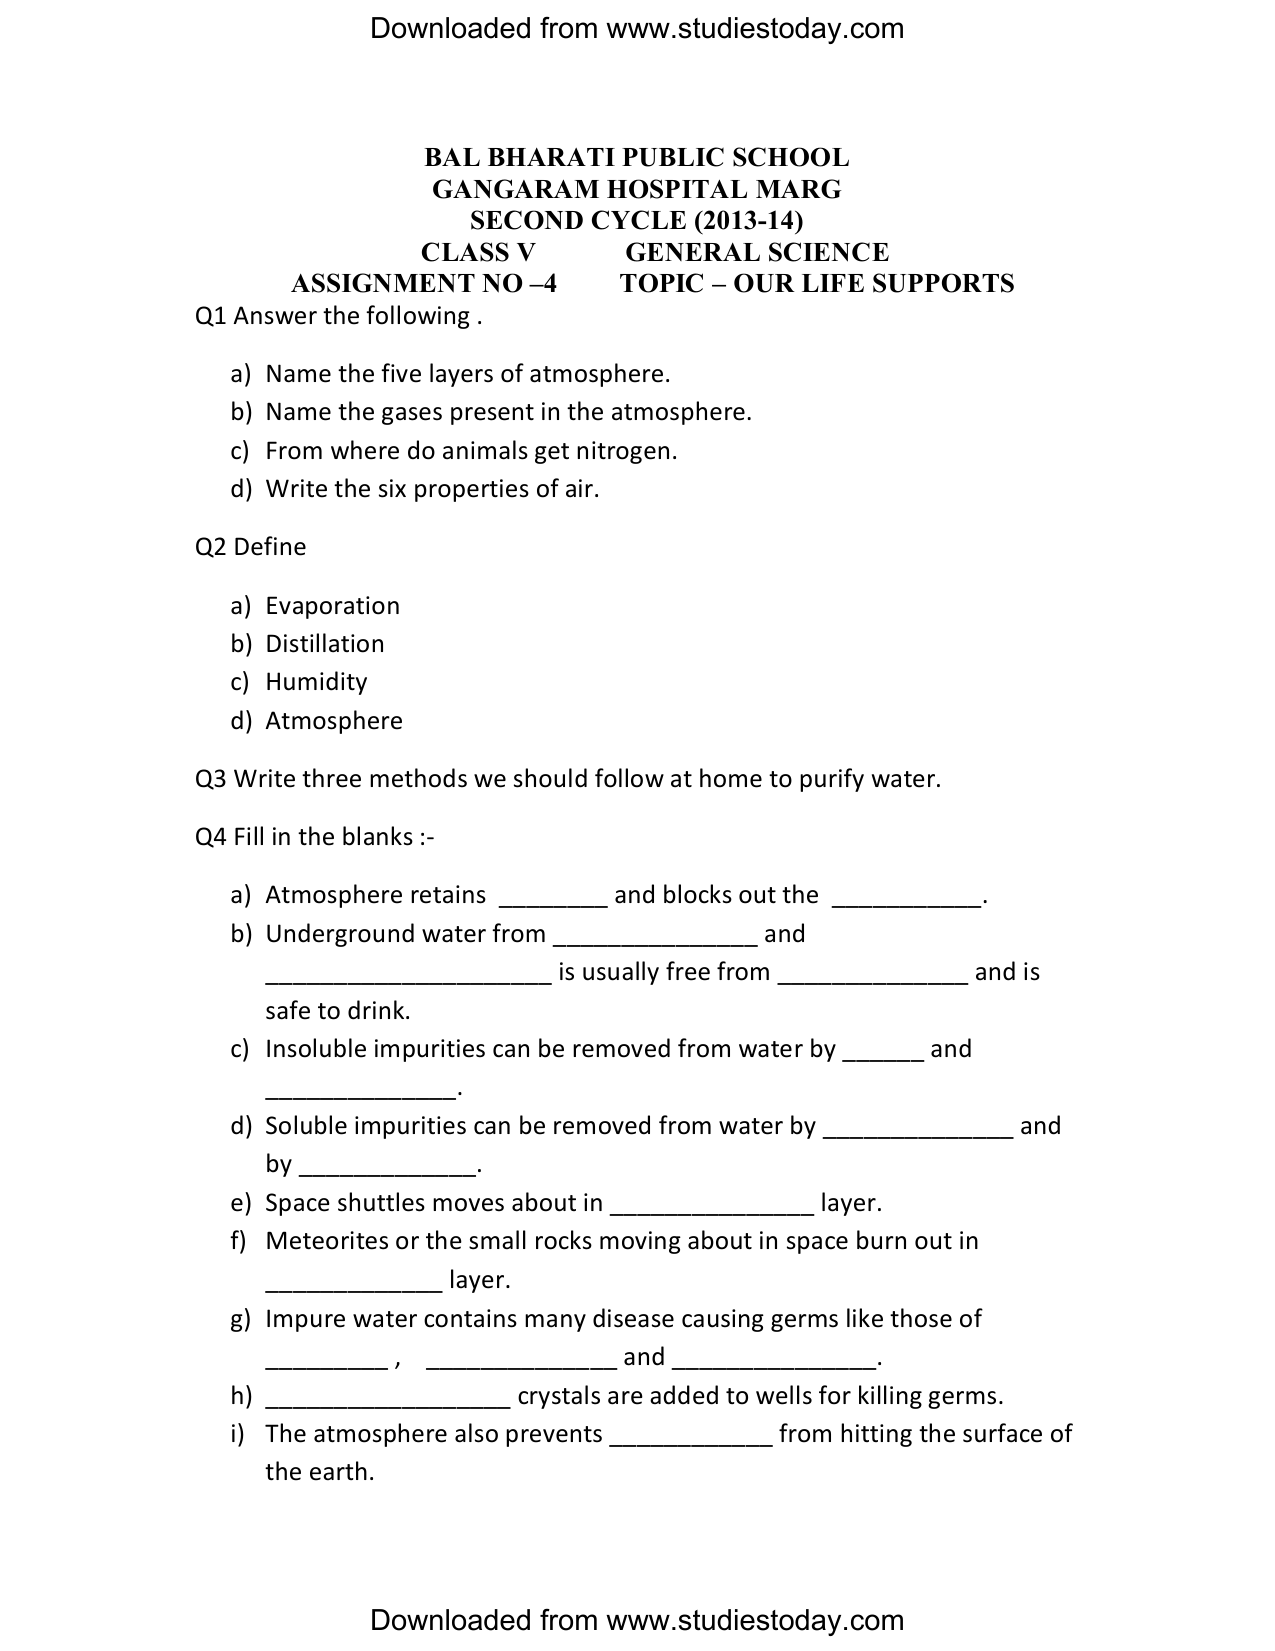 cbse-class-5-science-worksheets-4-photos